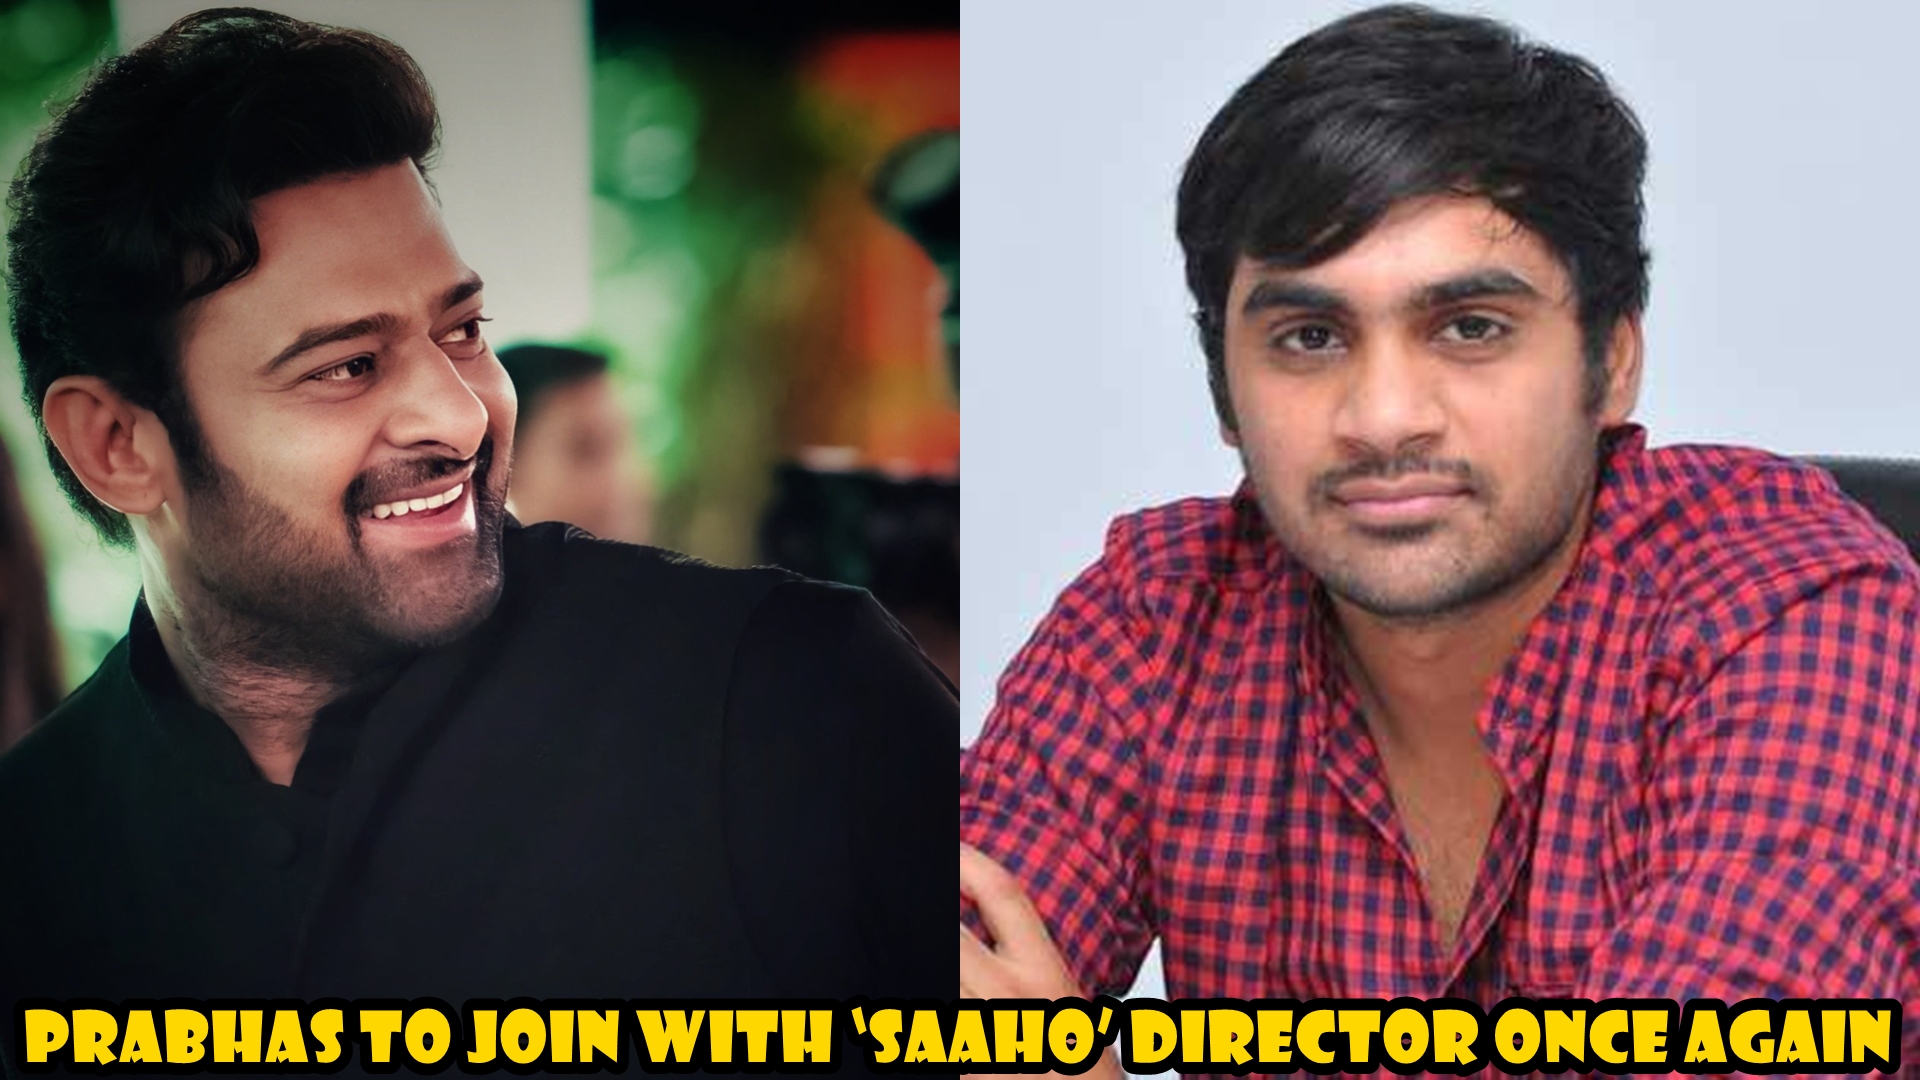 Prabhas to join with ‘Saaho’ director once Again